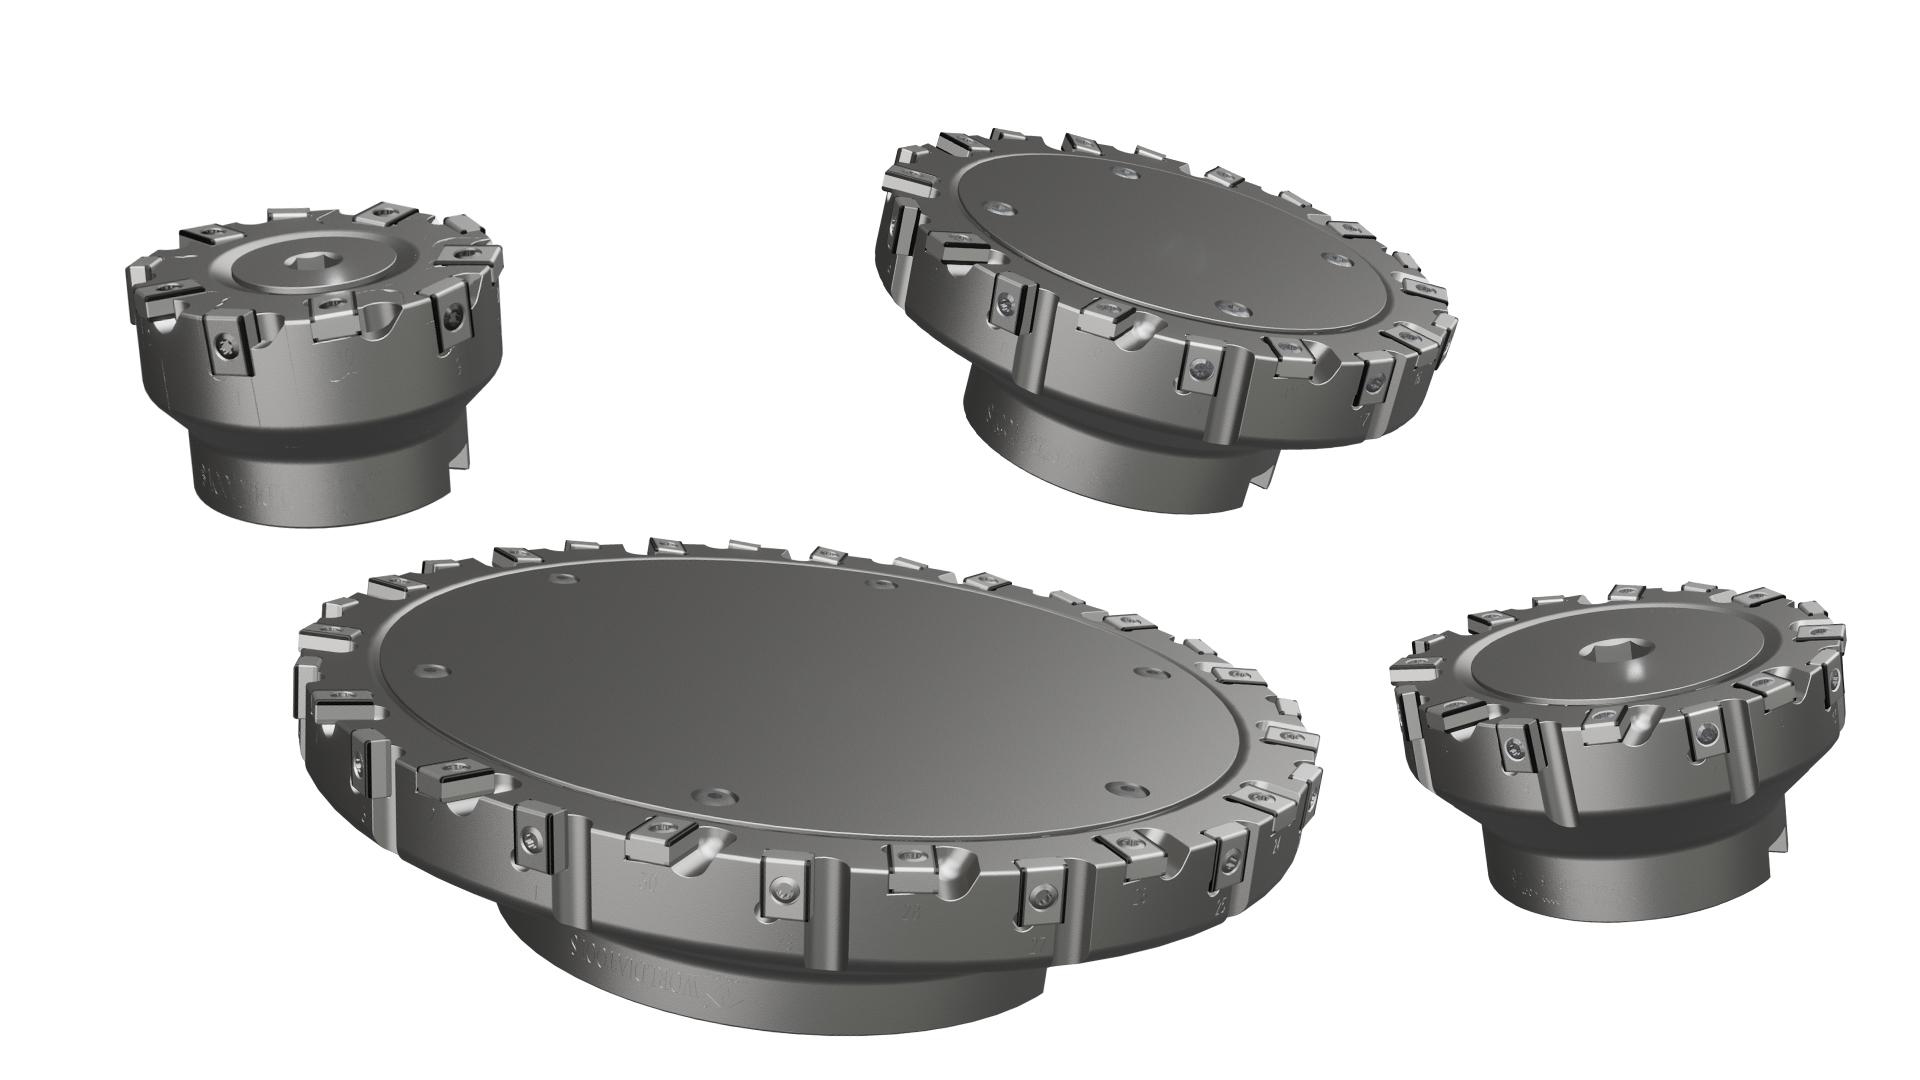 Updated Milling Series: FMP-LN Shell Milling Cutter